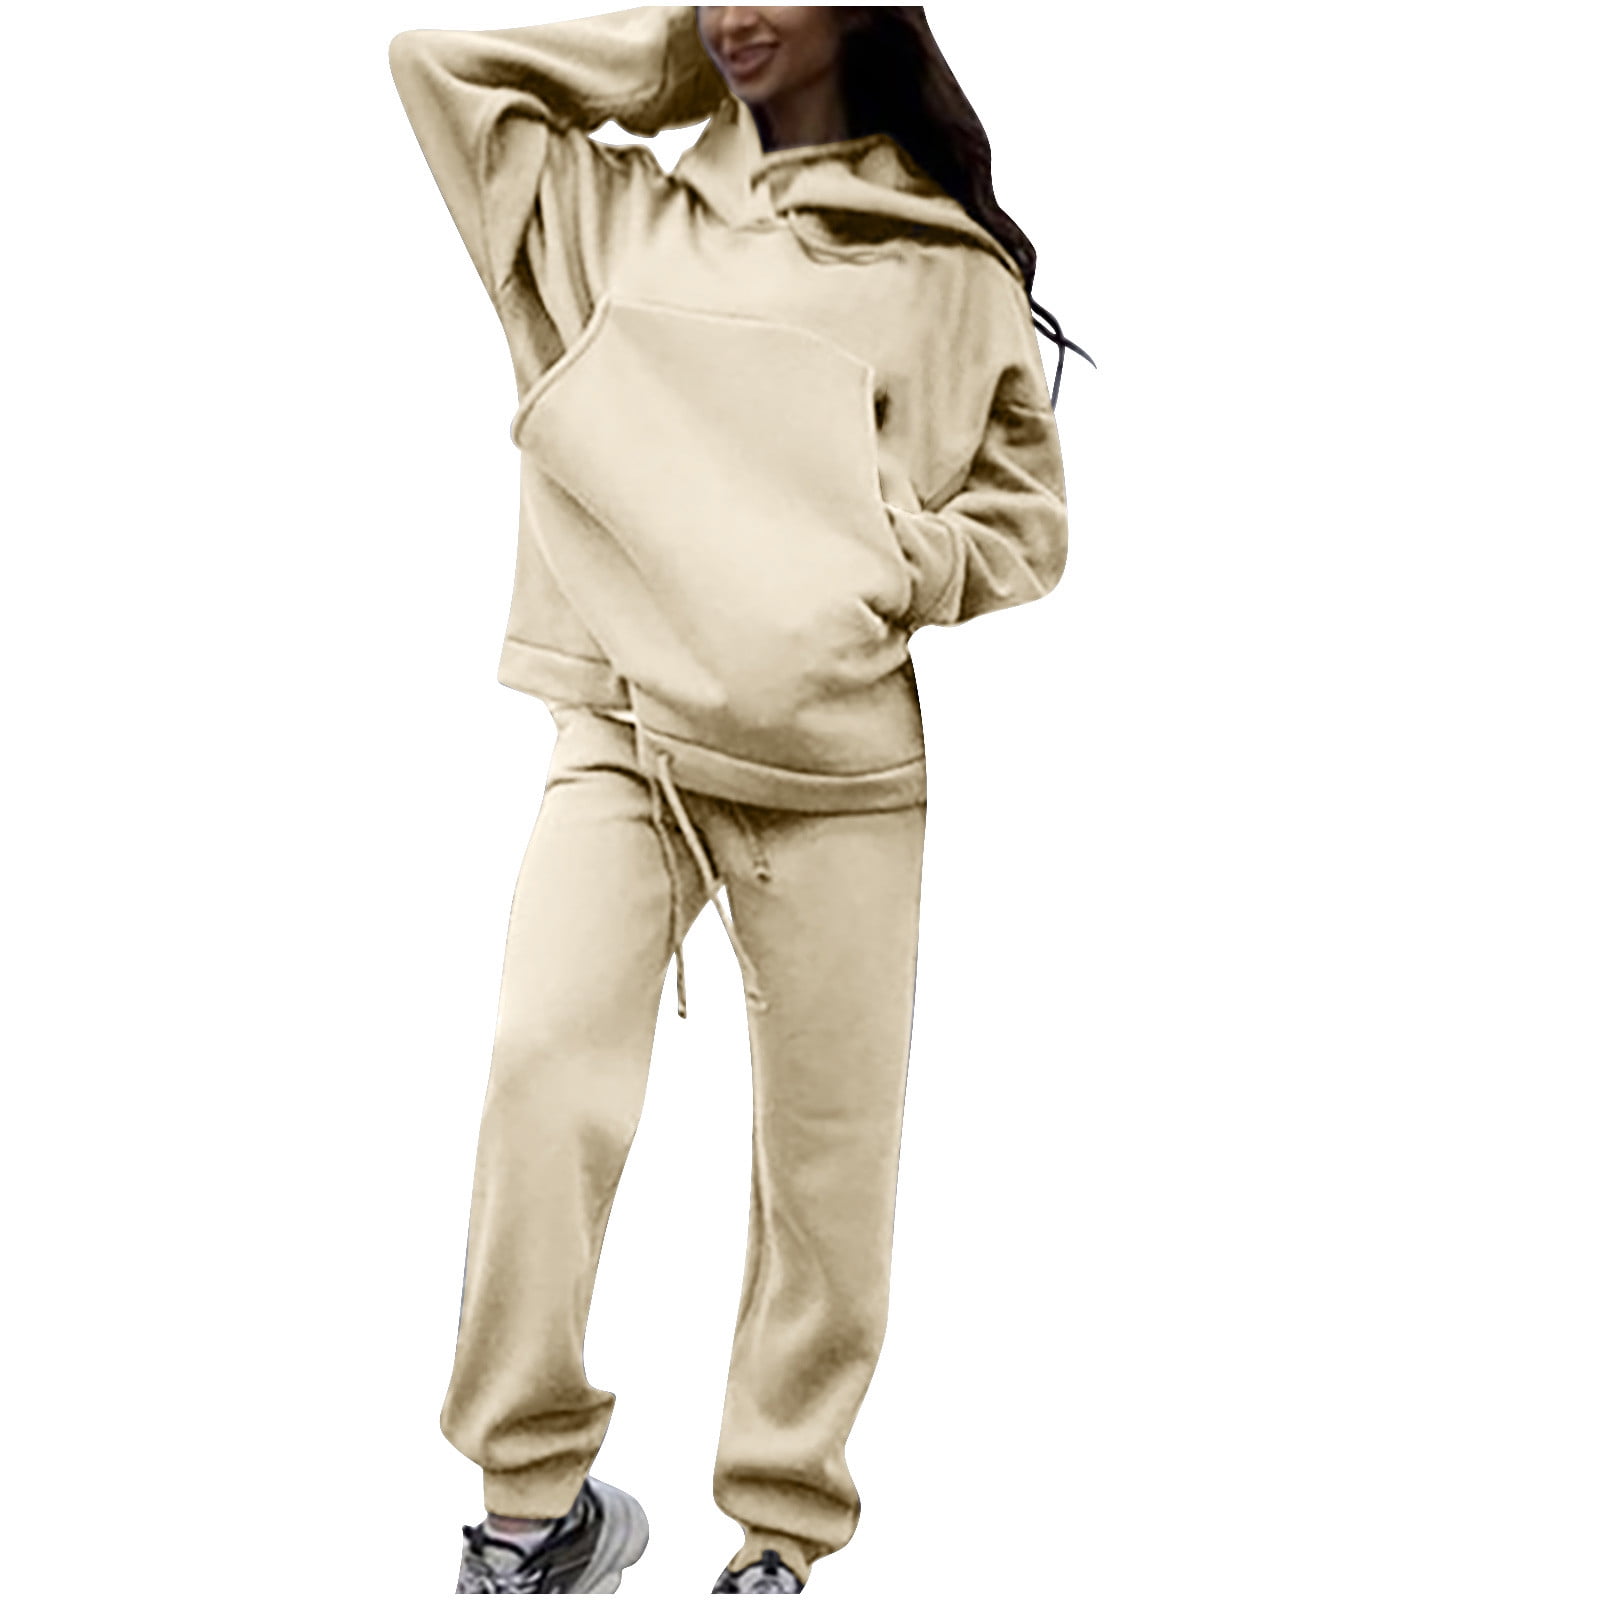 Ladies Coords Outfits Tracksuit Causal Soild Color Seamless Baggy